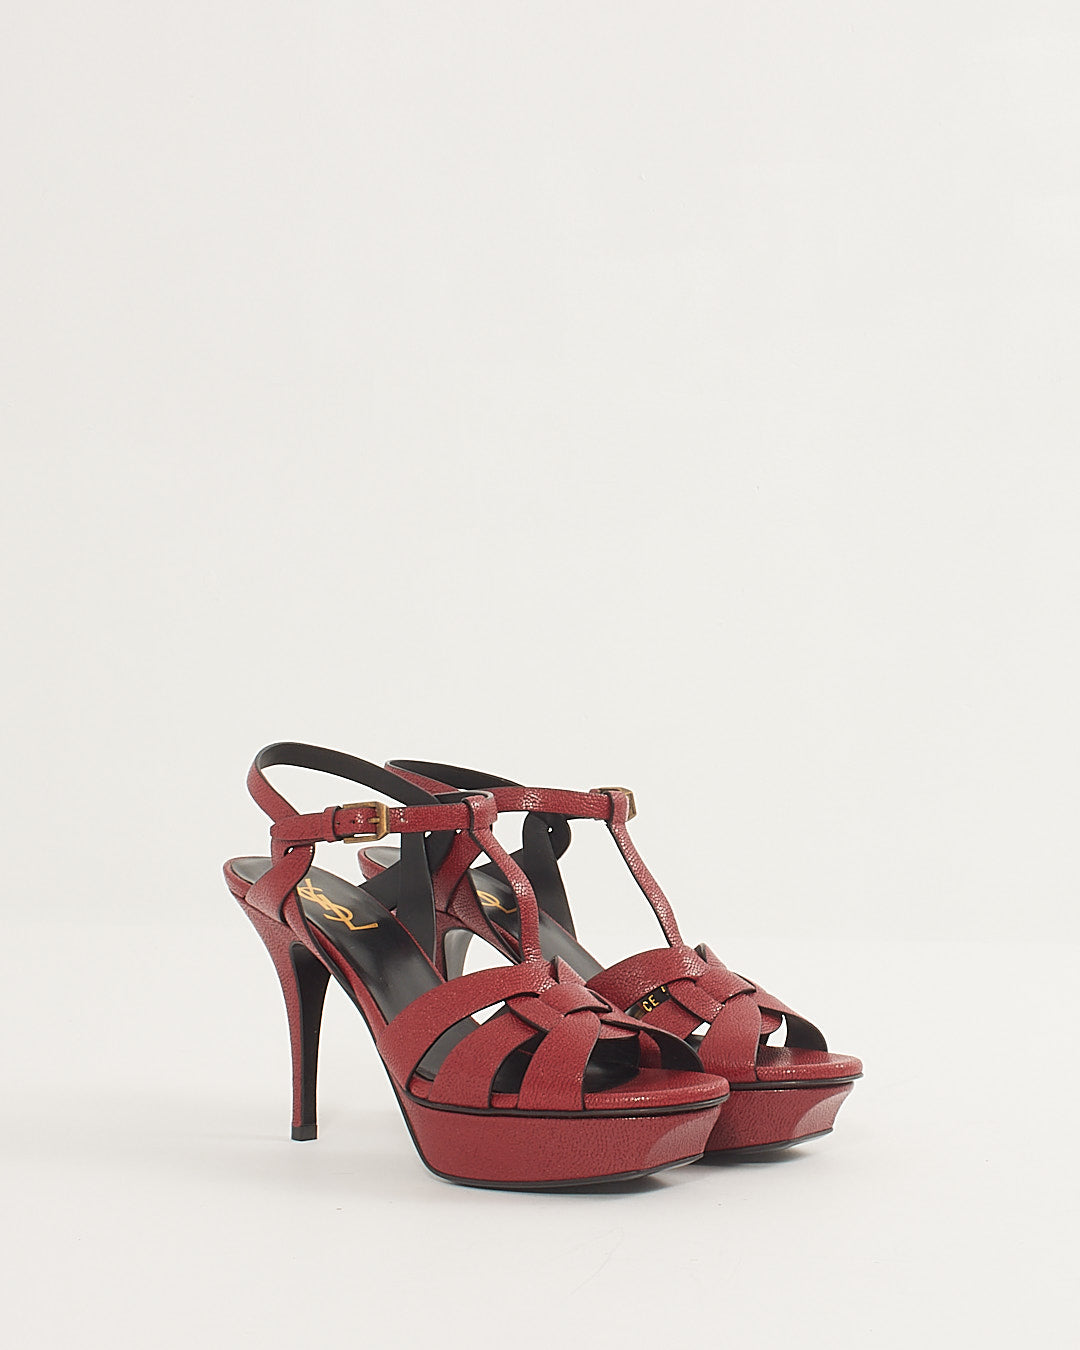 Saint Laurent Red Grained Leather Tribute Heeled Sandals - 39